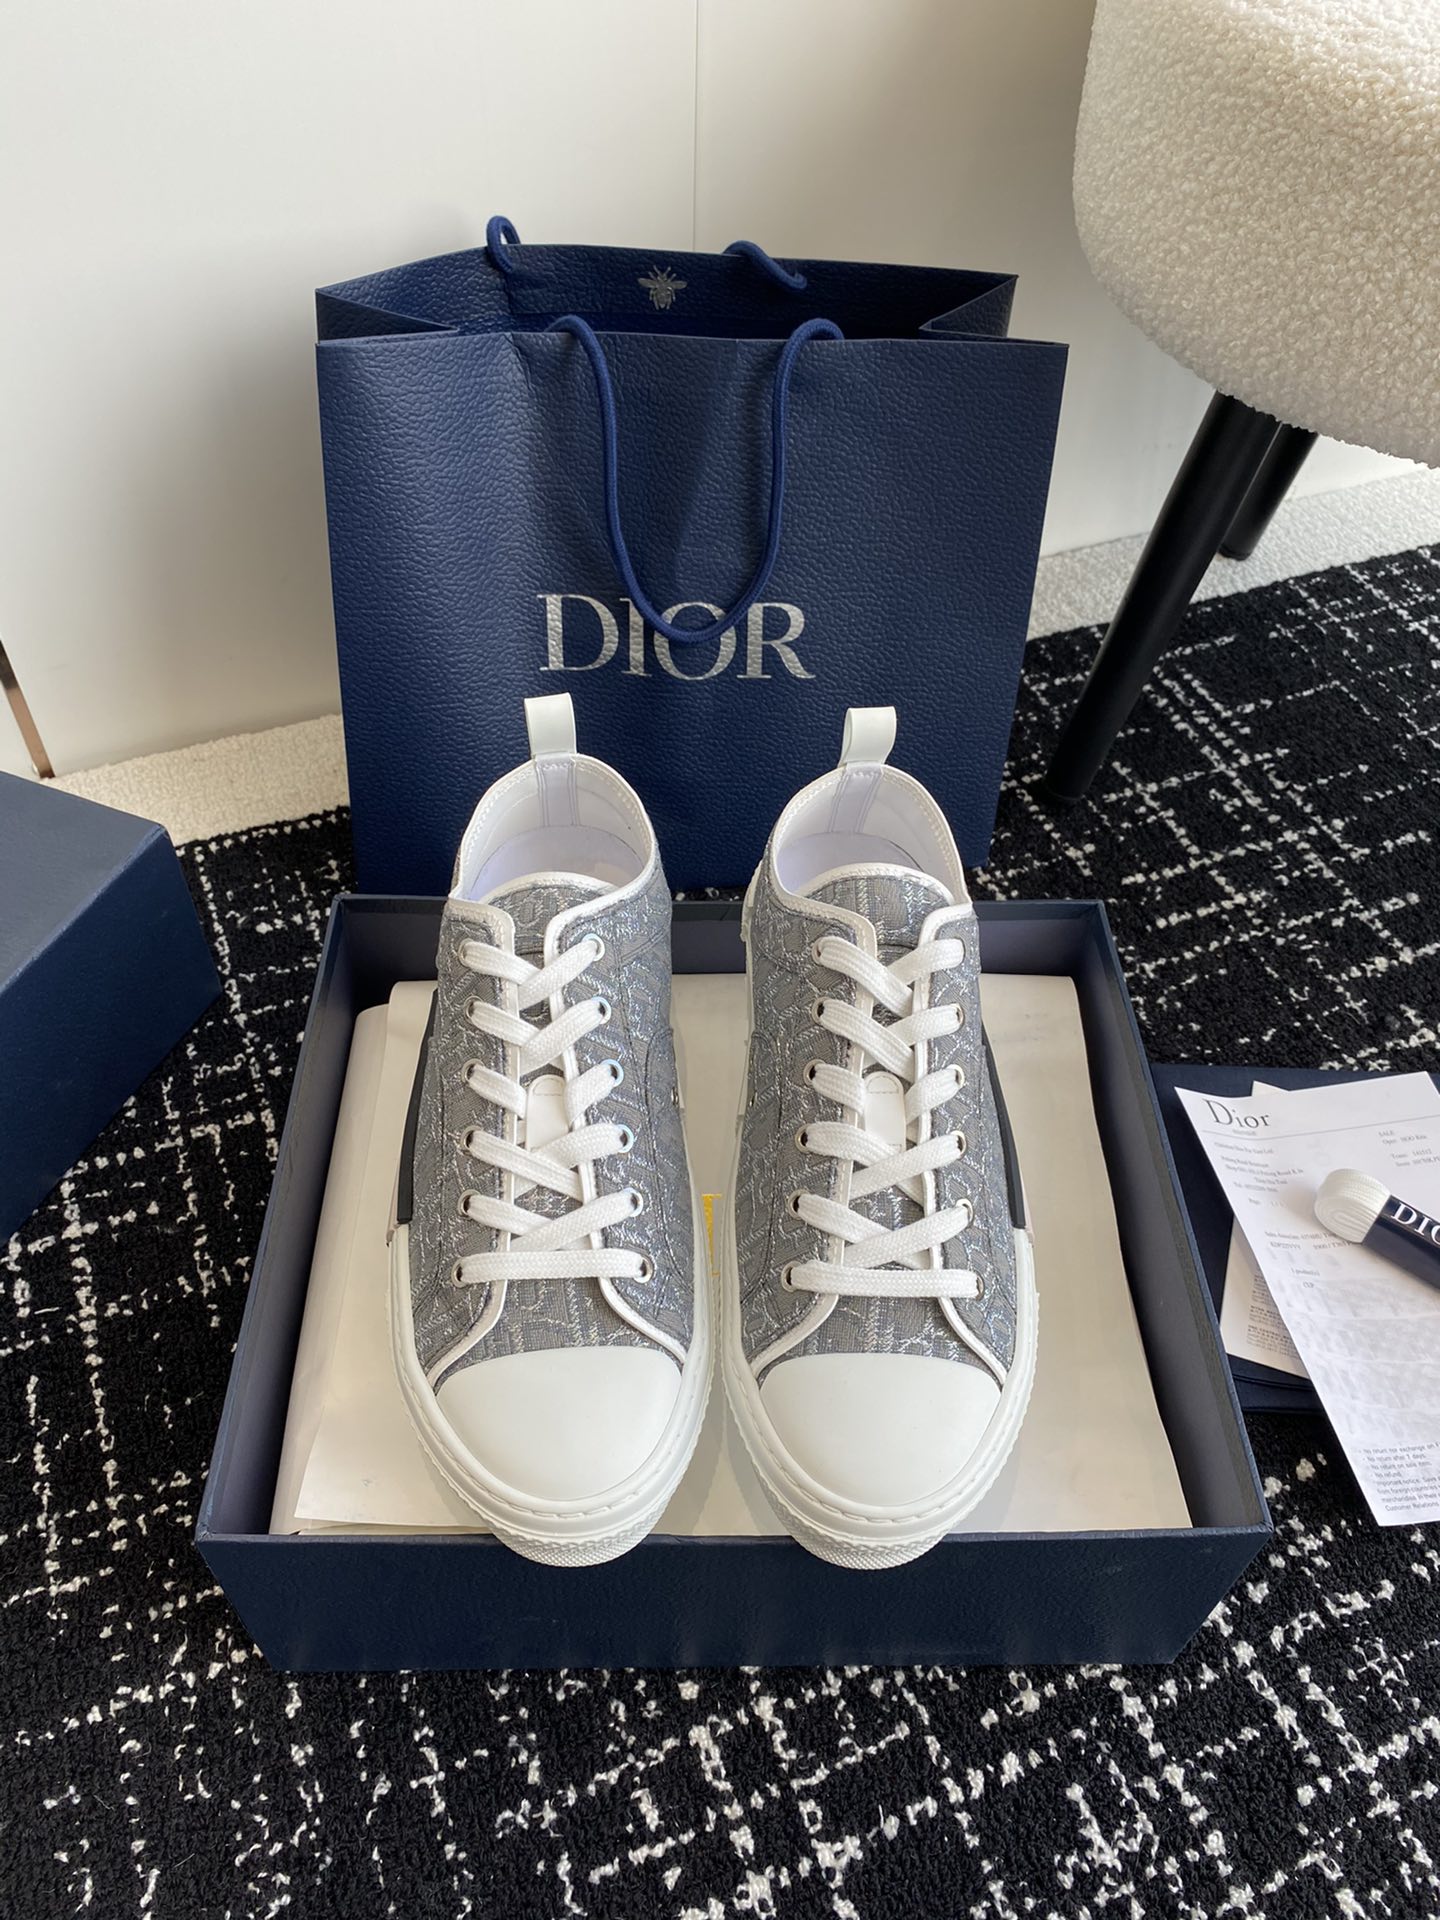 Dior Skateboard Shoes Sneakers Printing Unisex Women Men Canvas TPU Oblique High Tops